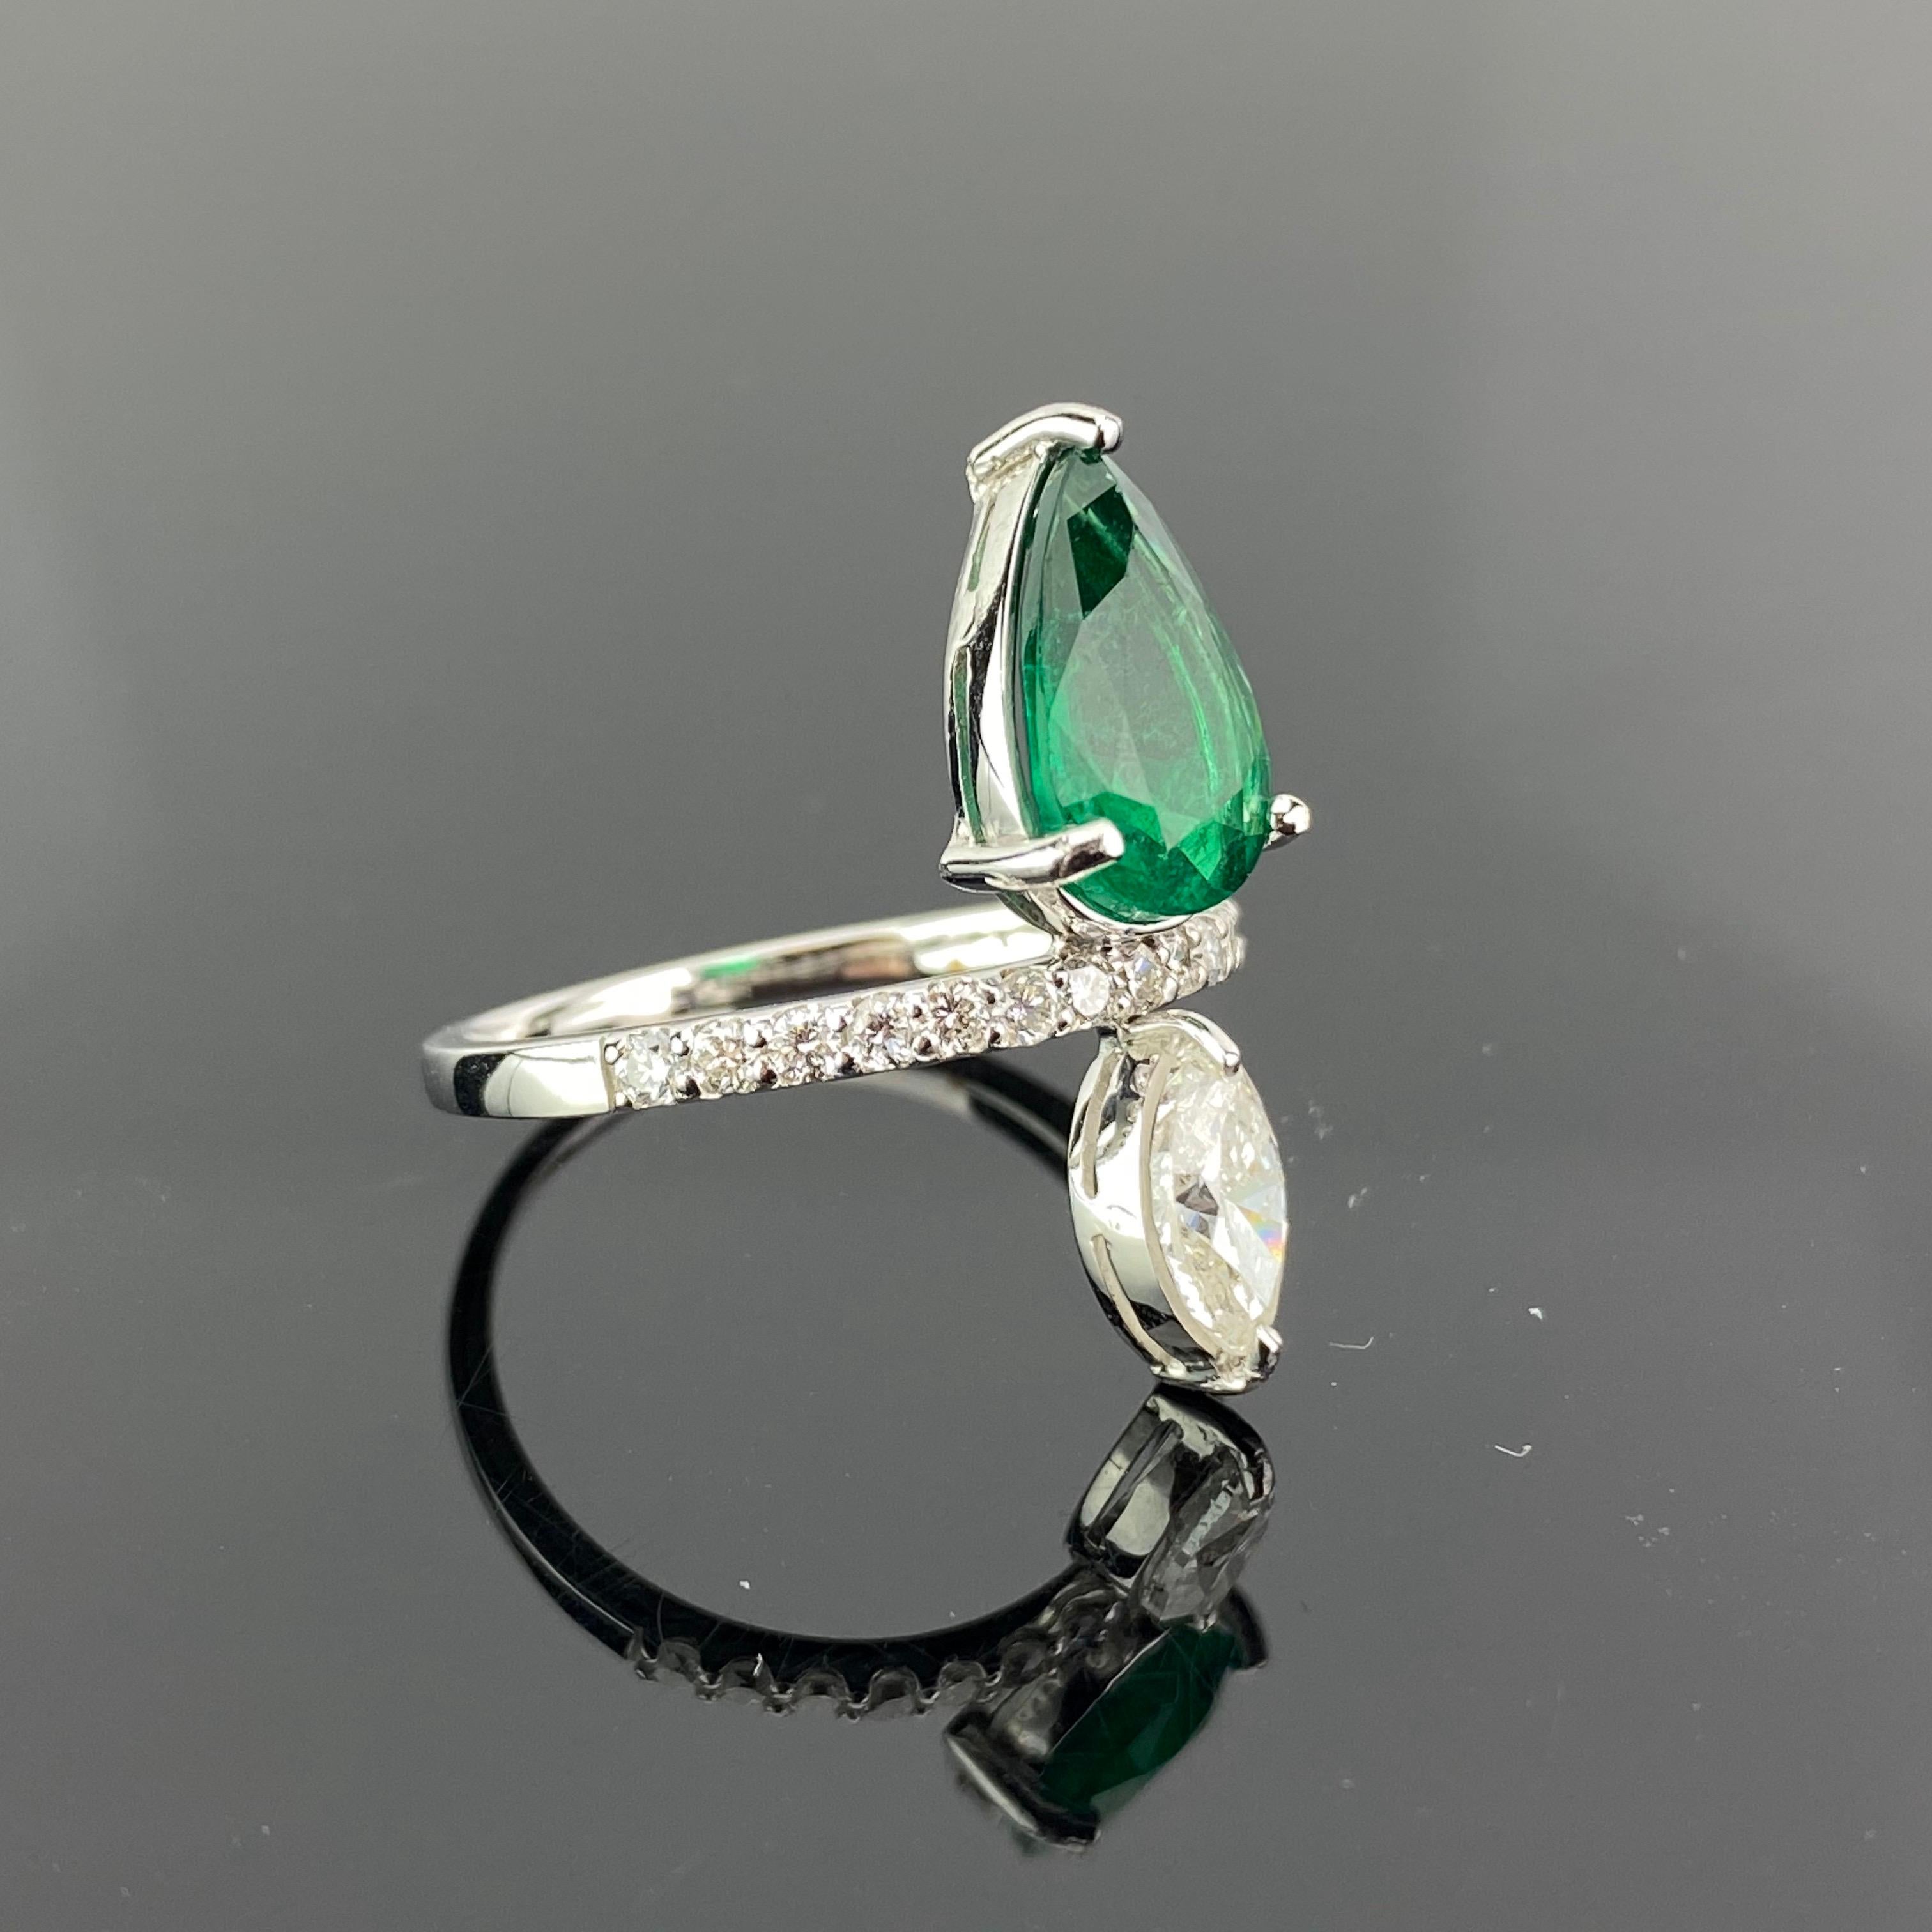 A modern, yet classic 2.30 carat  Zambian Emerald and 0.73 carat Diamond Marquise ring, attached to a Diamond band. The emerald is transparent with great lustre and colour, with few inclusions. All set in 18K white gold. Currently a ring size US 7,